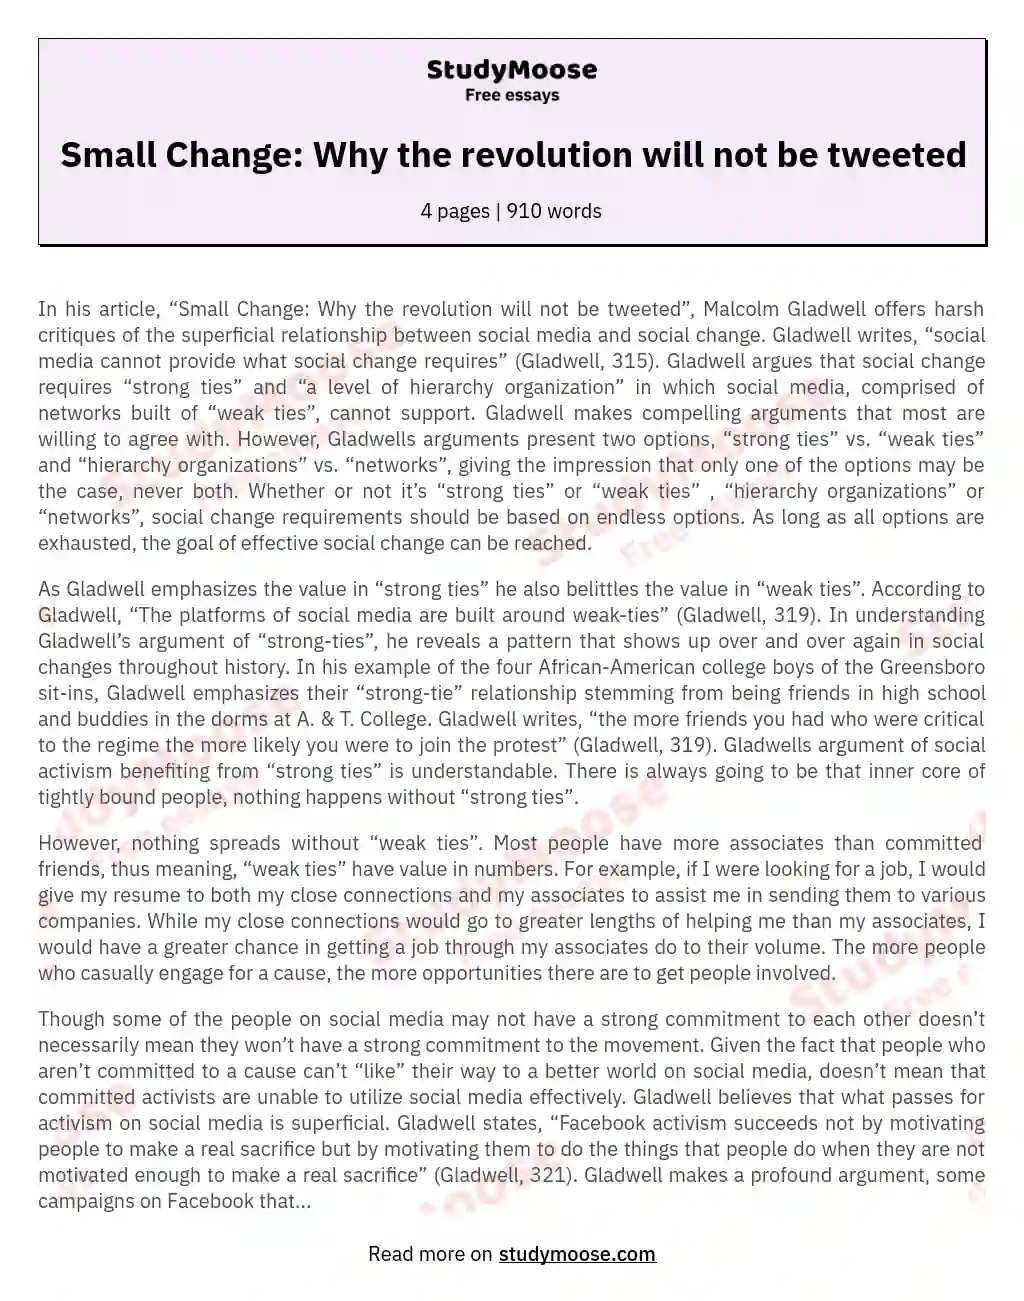 Small Change: Why the revolution will not be tweeted essay